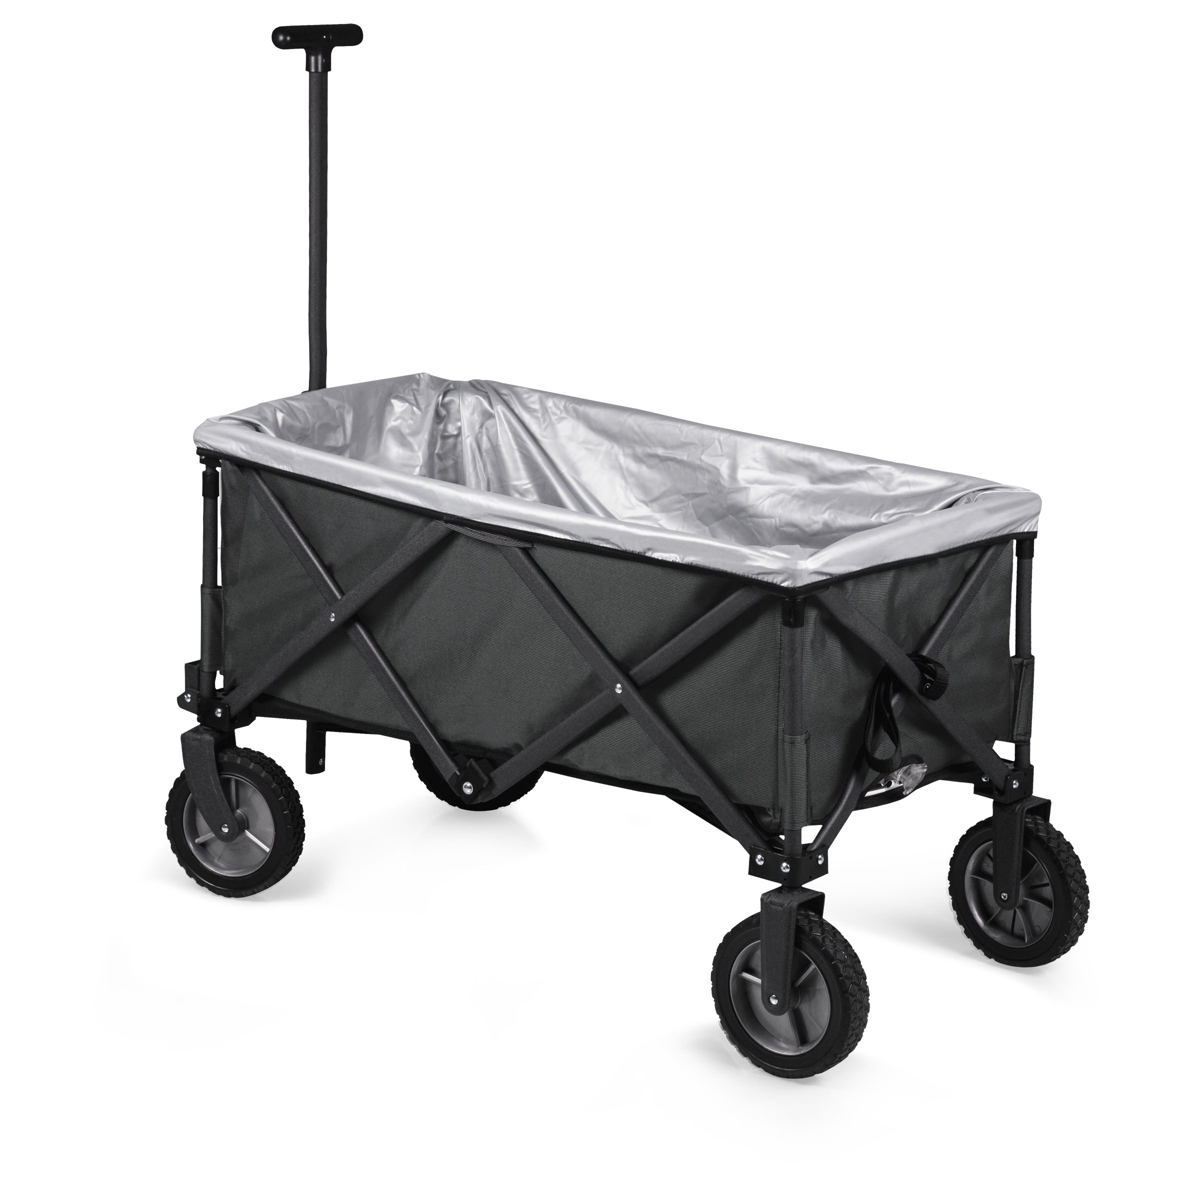 by Picnic Time Adventure Wagon Elite Portable Utility Wagon with Table & Liner - Grey